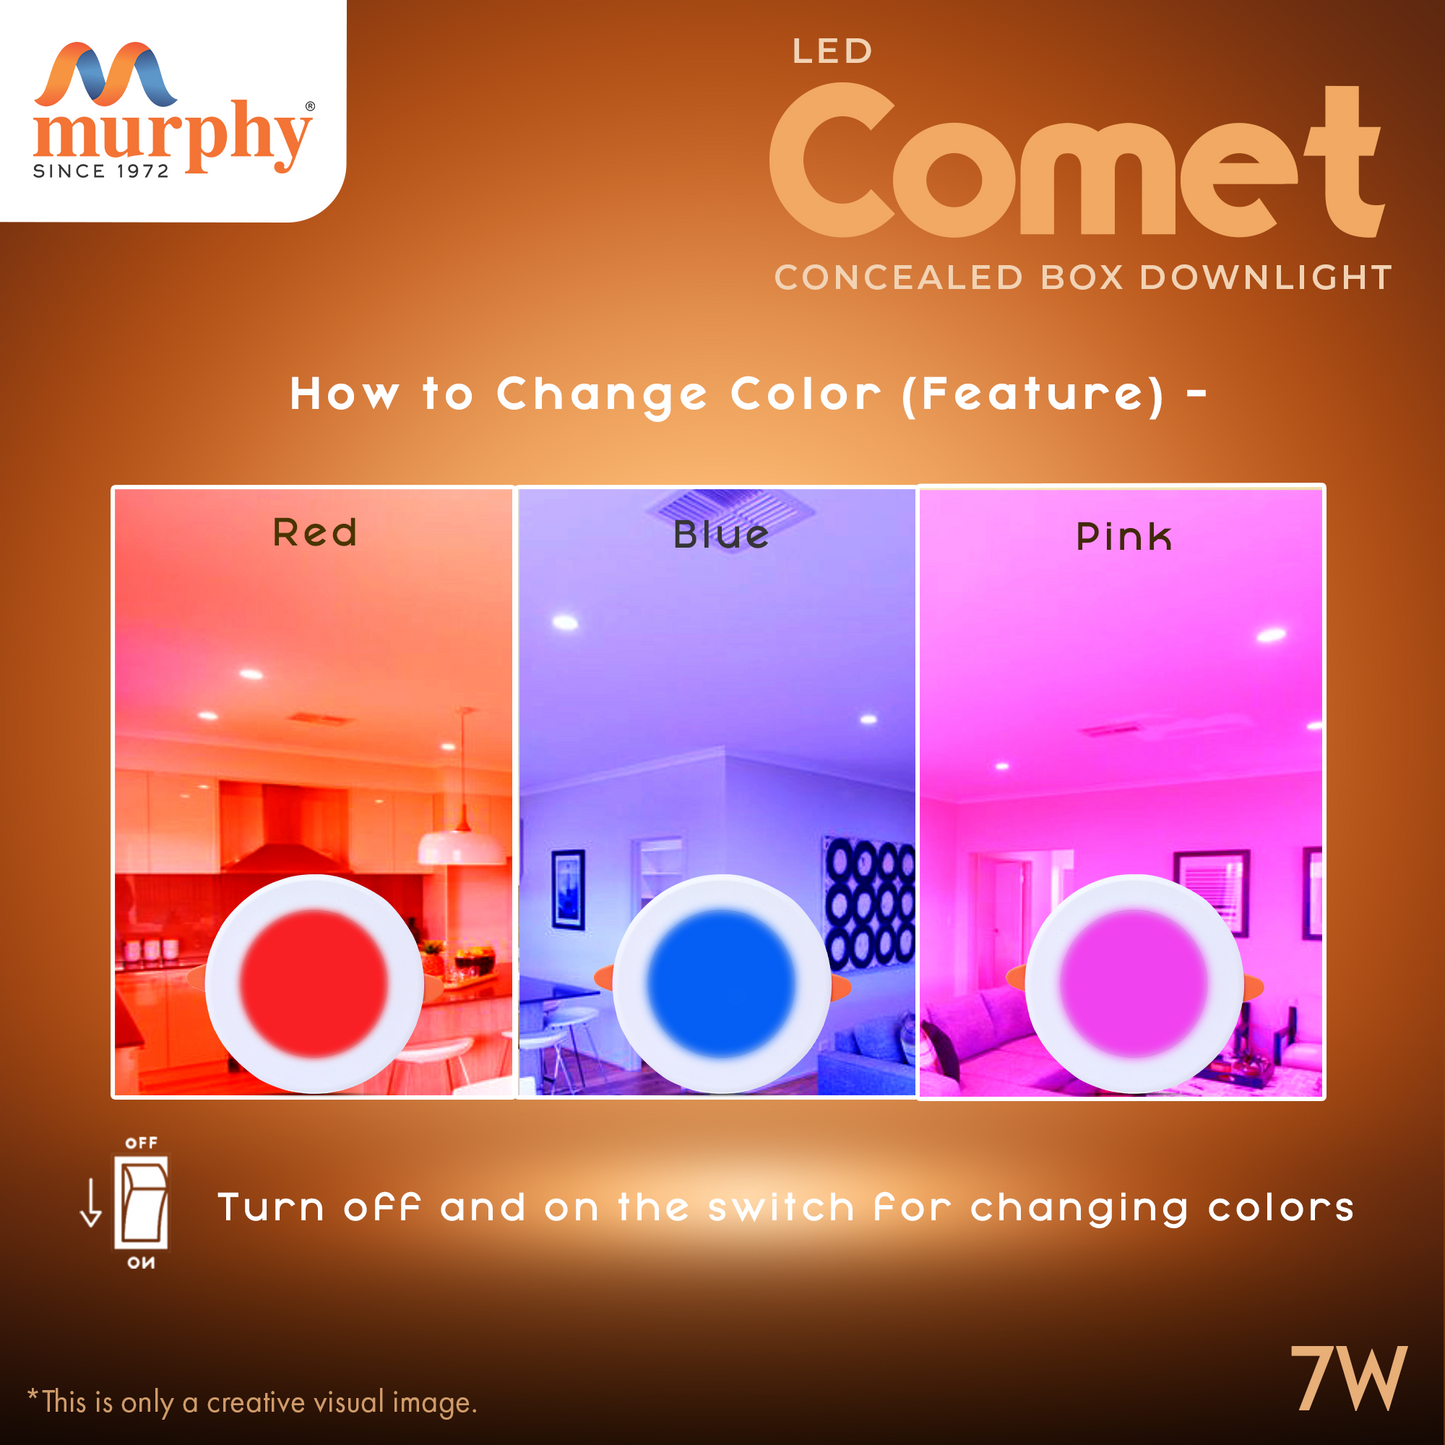 Murphy 7W Comet LED 3-IN-1 Color Changing Down Light : Red + Blue + Pink